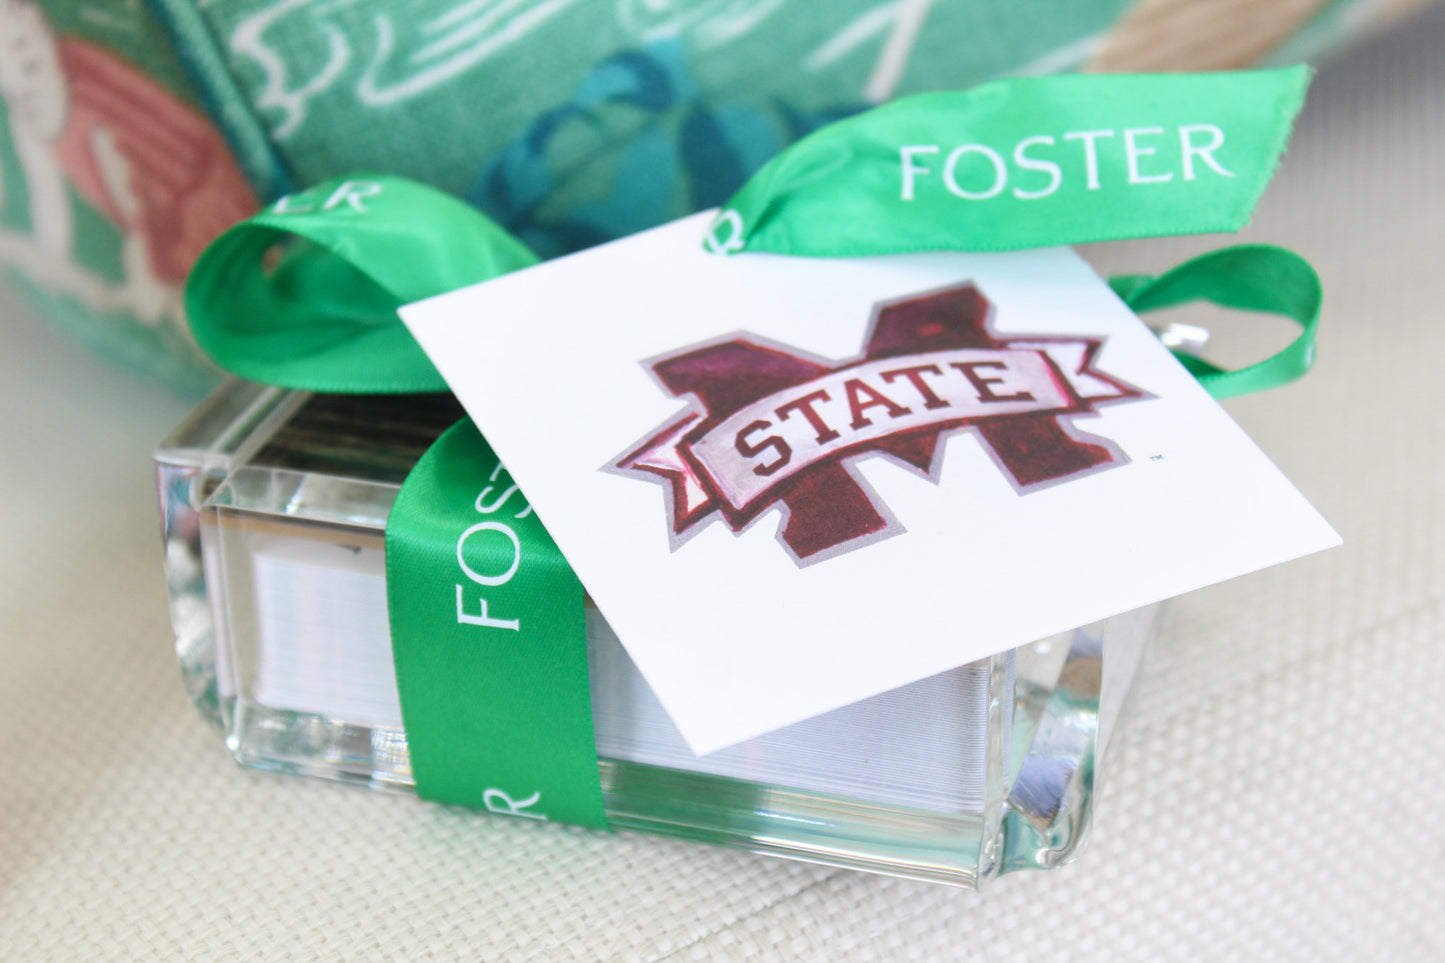 Mississippi (MS) State Gift Tag set by FOSTER